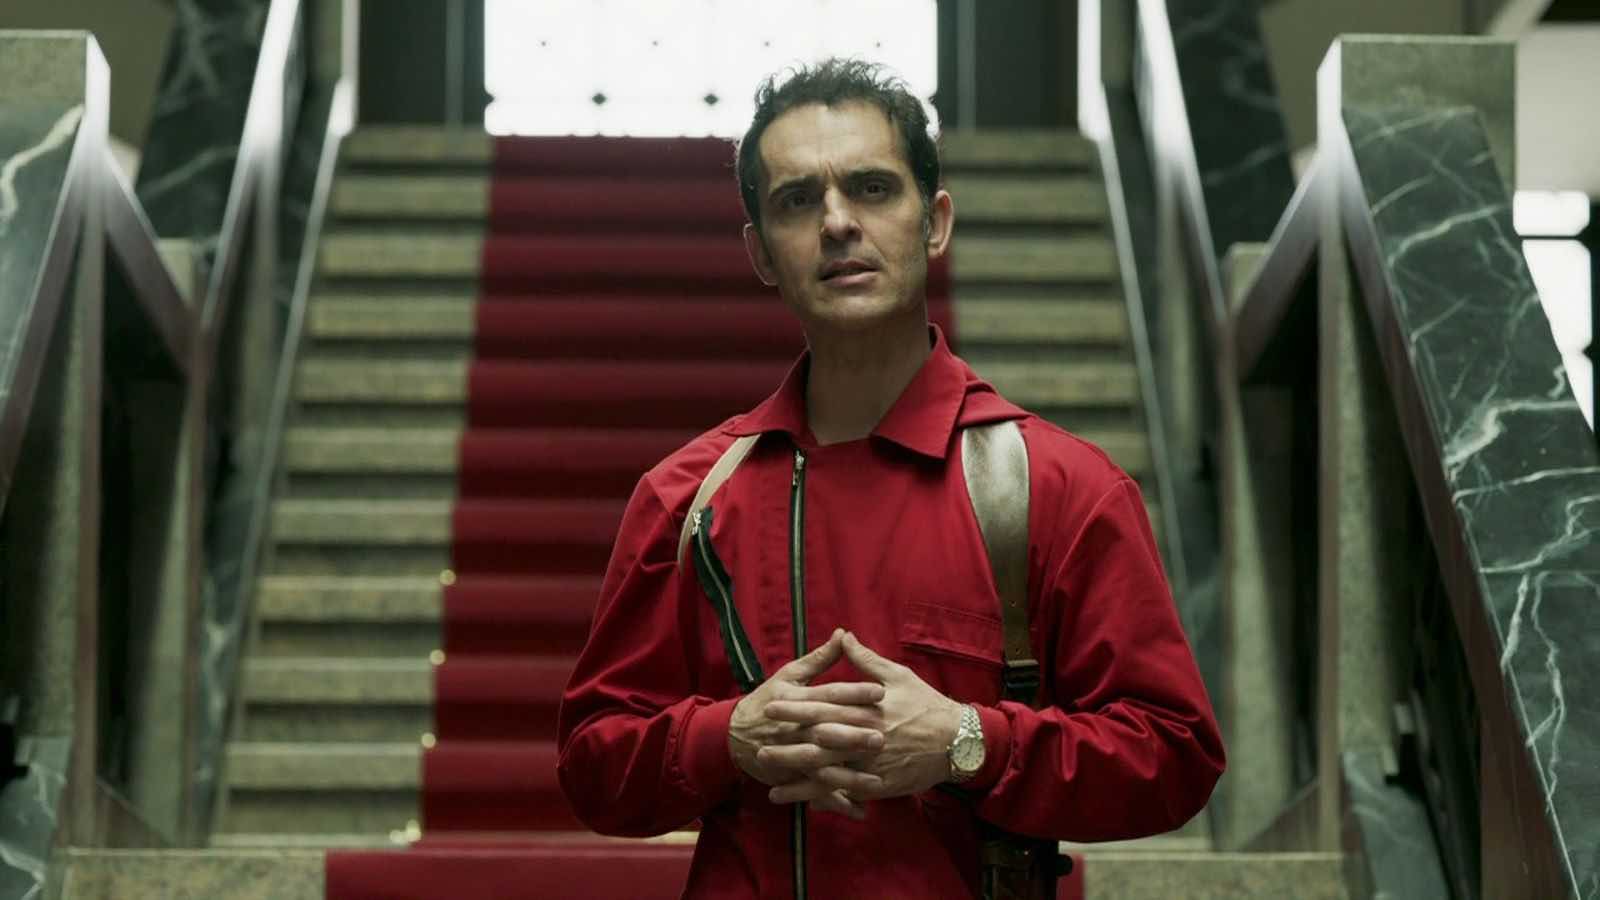 The best inspirational quotes from 'Money Heist'